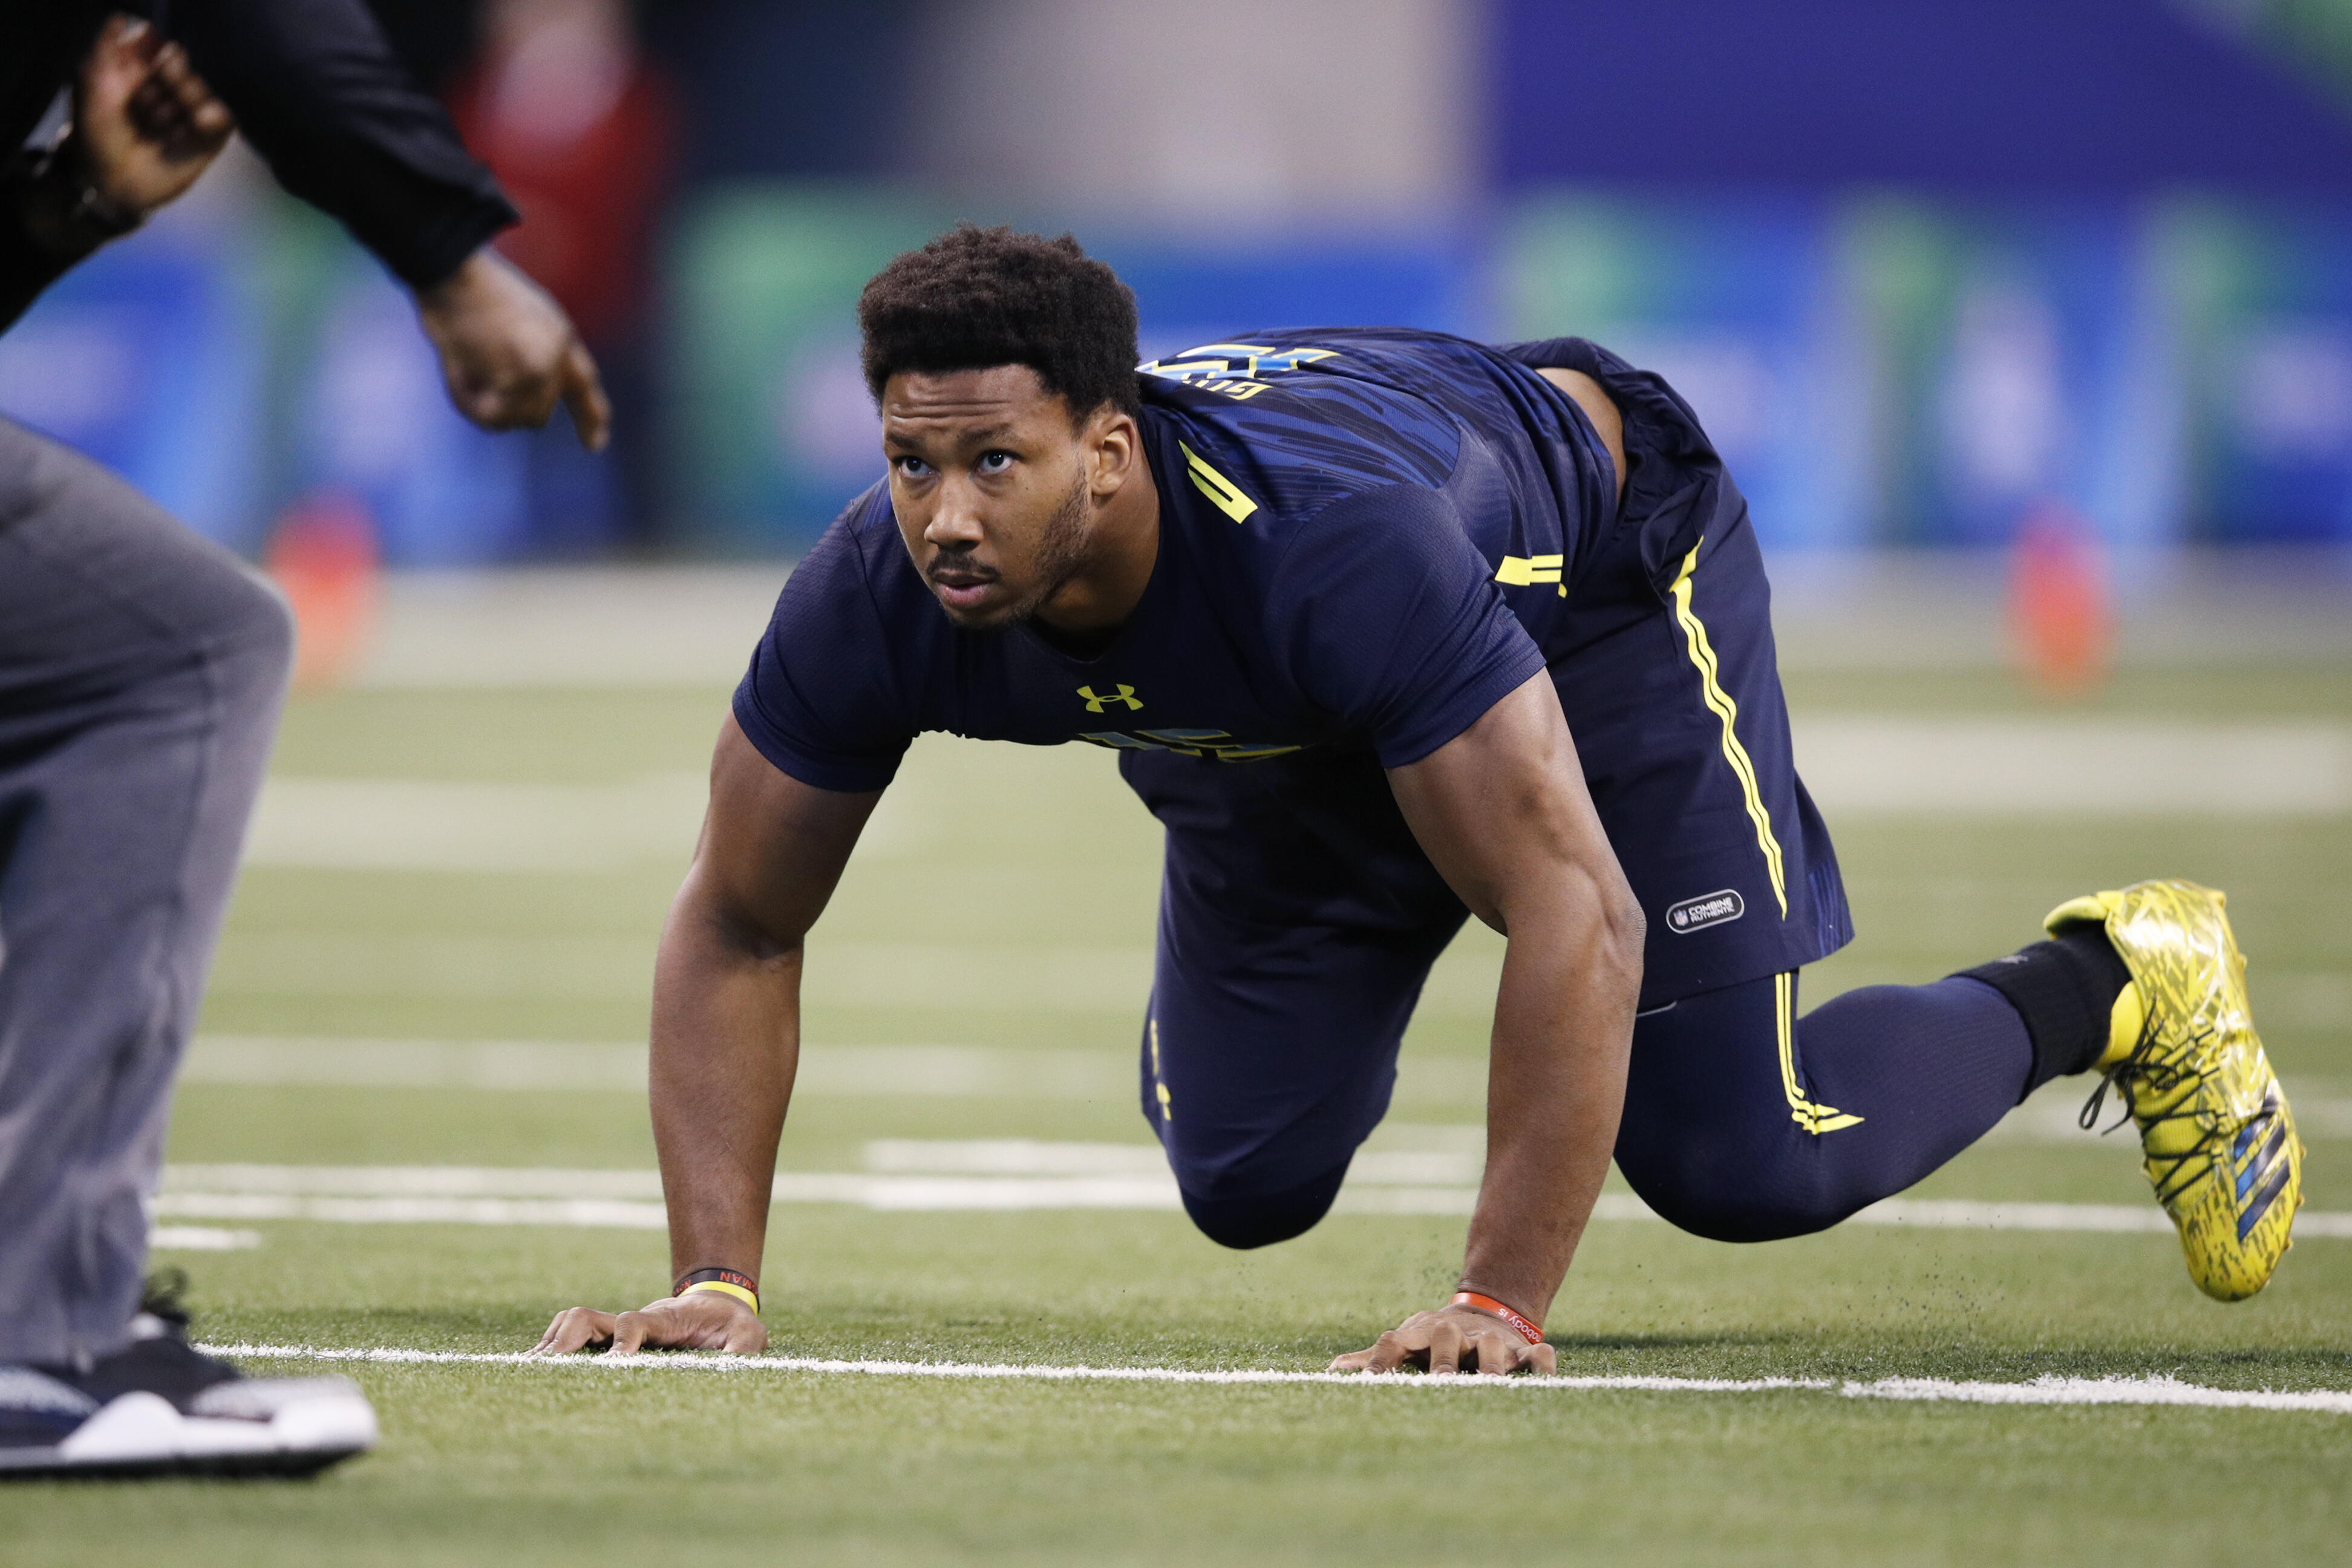 INDIANAPOLIS, IN - MARCH 05: Defensive lineman Myles Garrett of Texas A&M participates in a drill during day five of the NFL Combine at Lucas Oil Stadium on March 5, 2017 in Indianapolis, Indiana. (Photo by Joe Robbins/Getty Images)